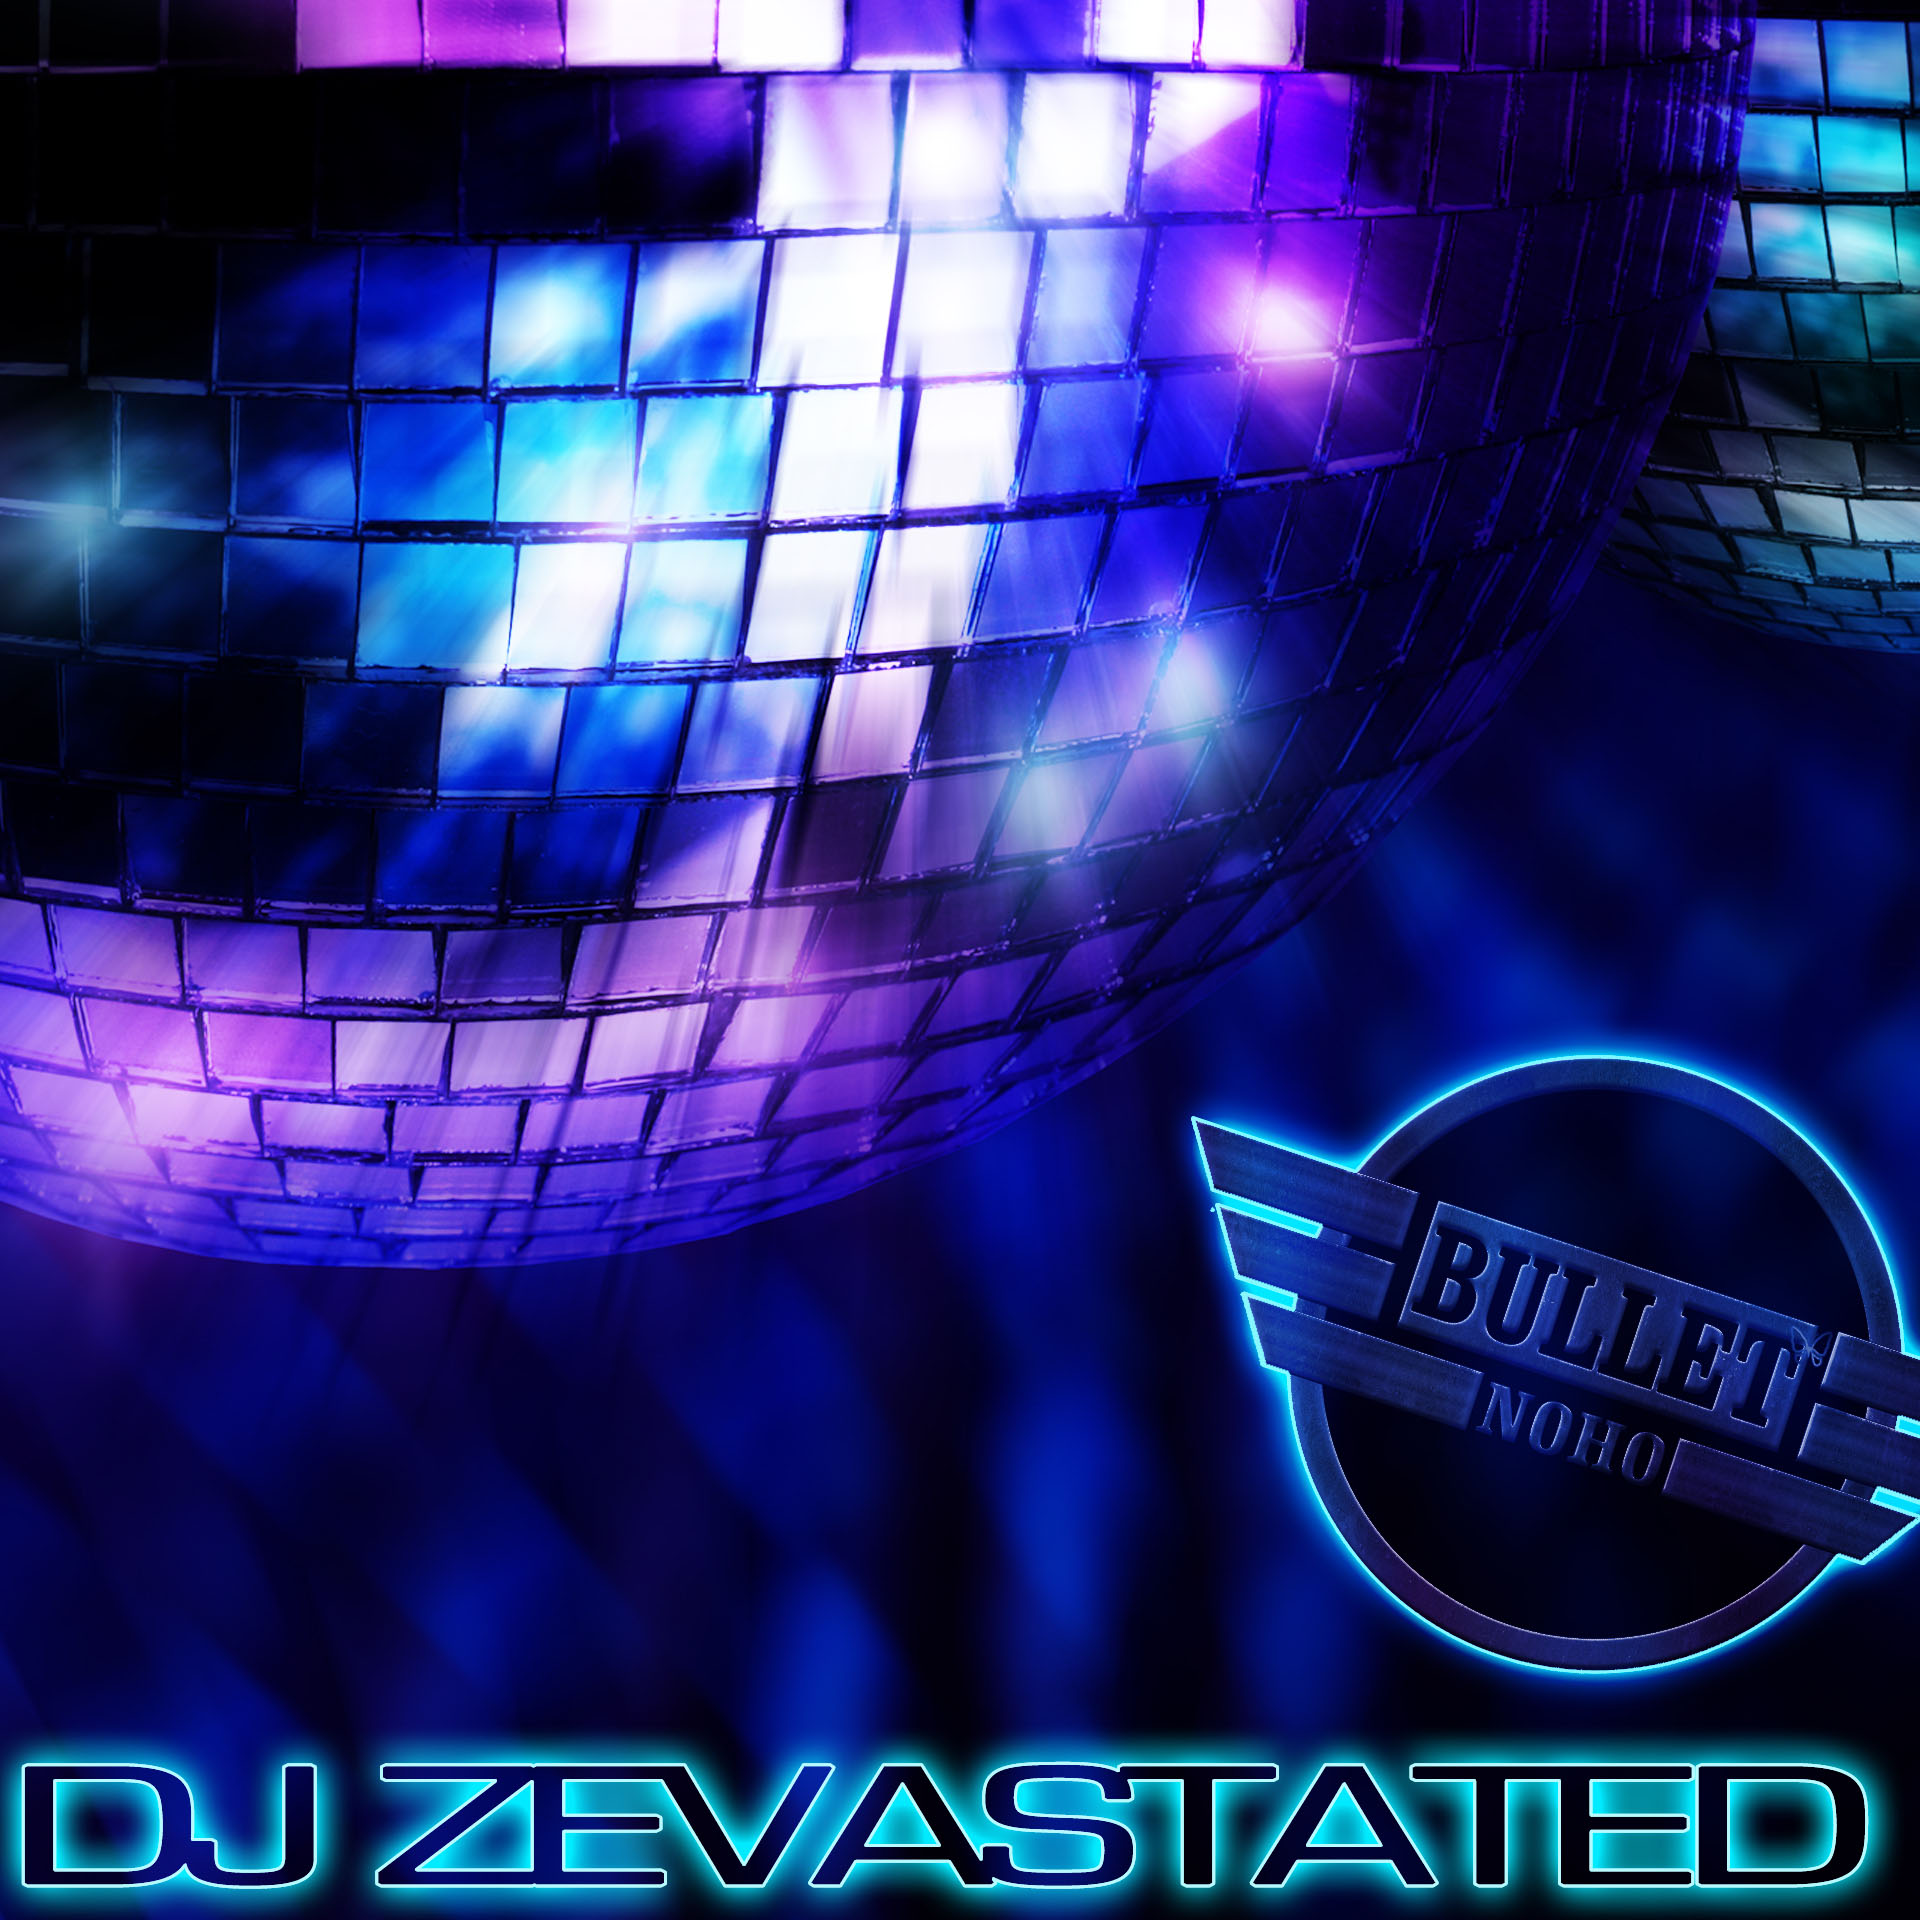 DJ ZEVASTATED: Sunday, 02/18/23 from 3:00 PM to 8:00 PM